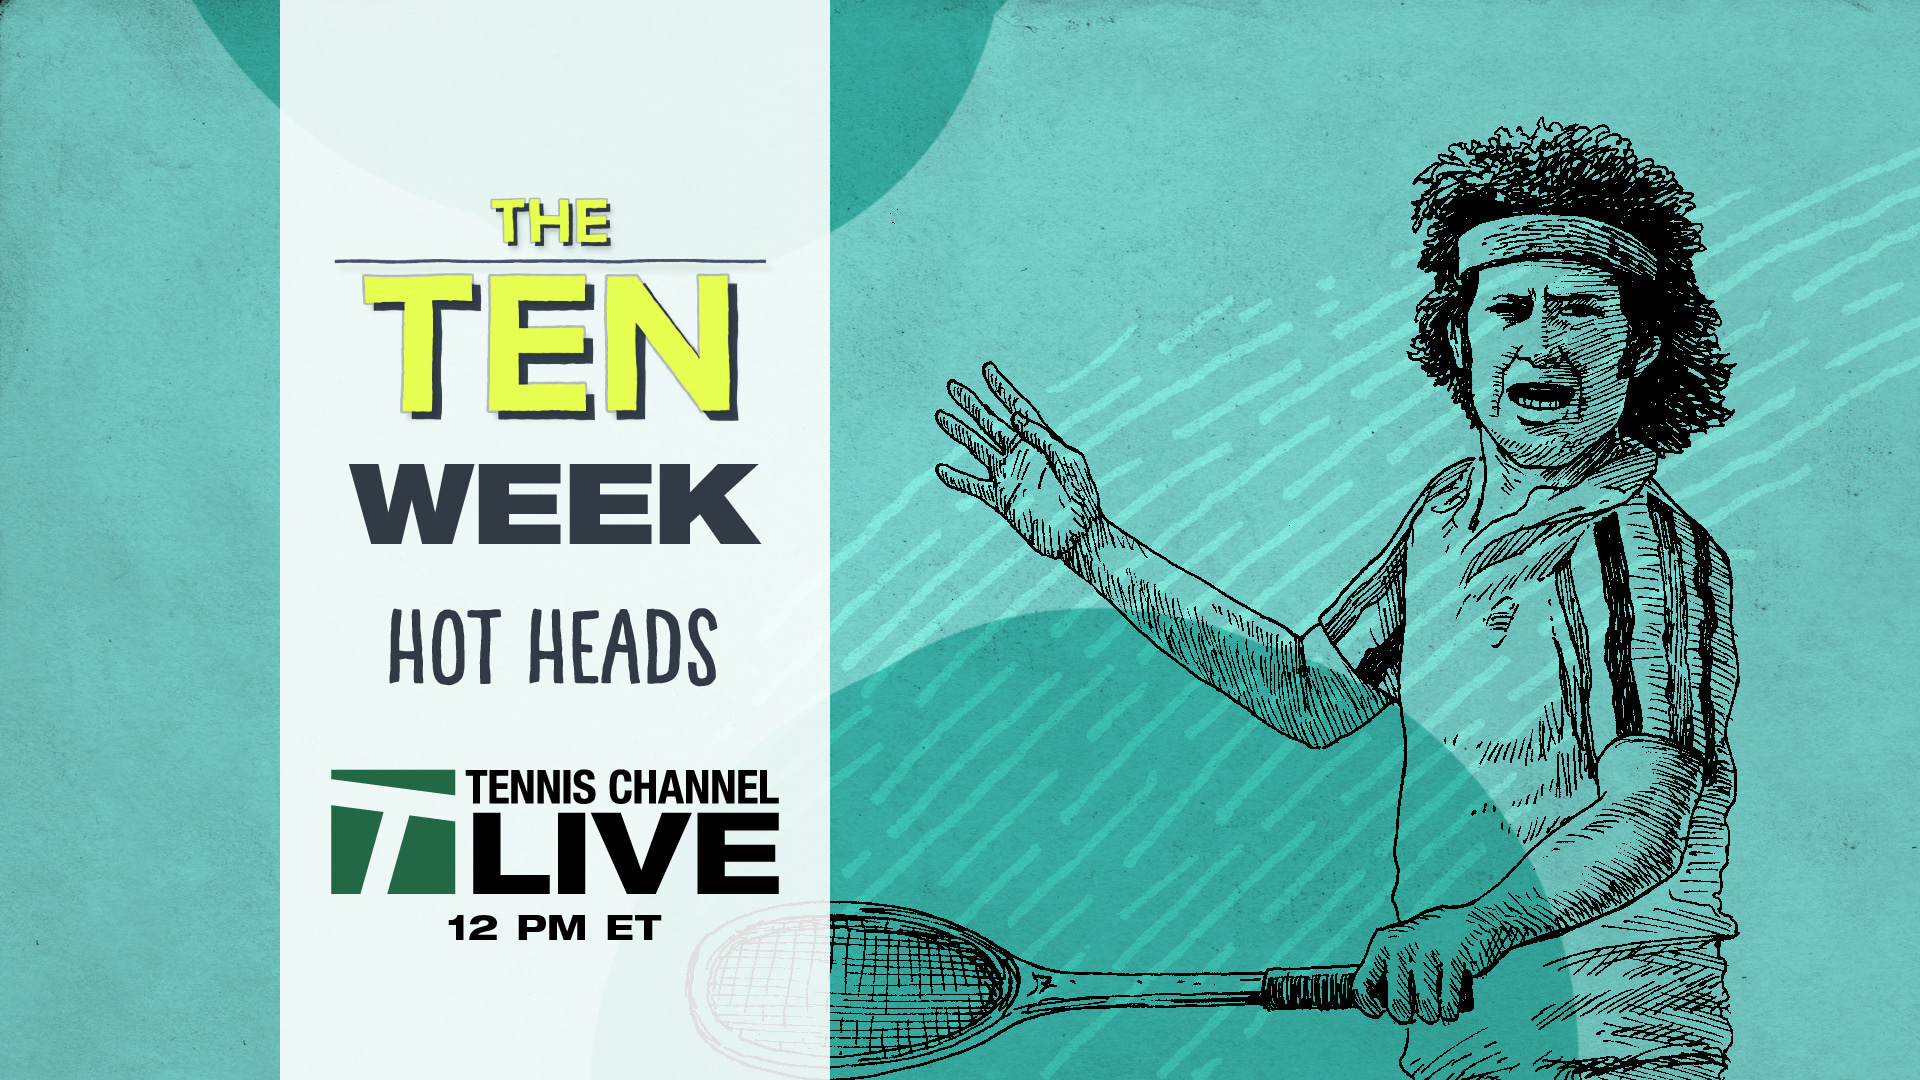 WATCH FULL EPISODE—Tennis Channel Live, May 14 The Ten, Hotheads Tennis 